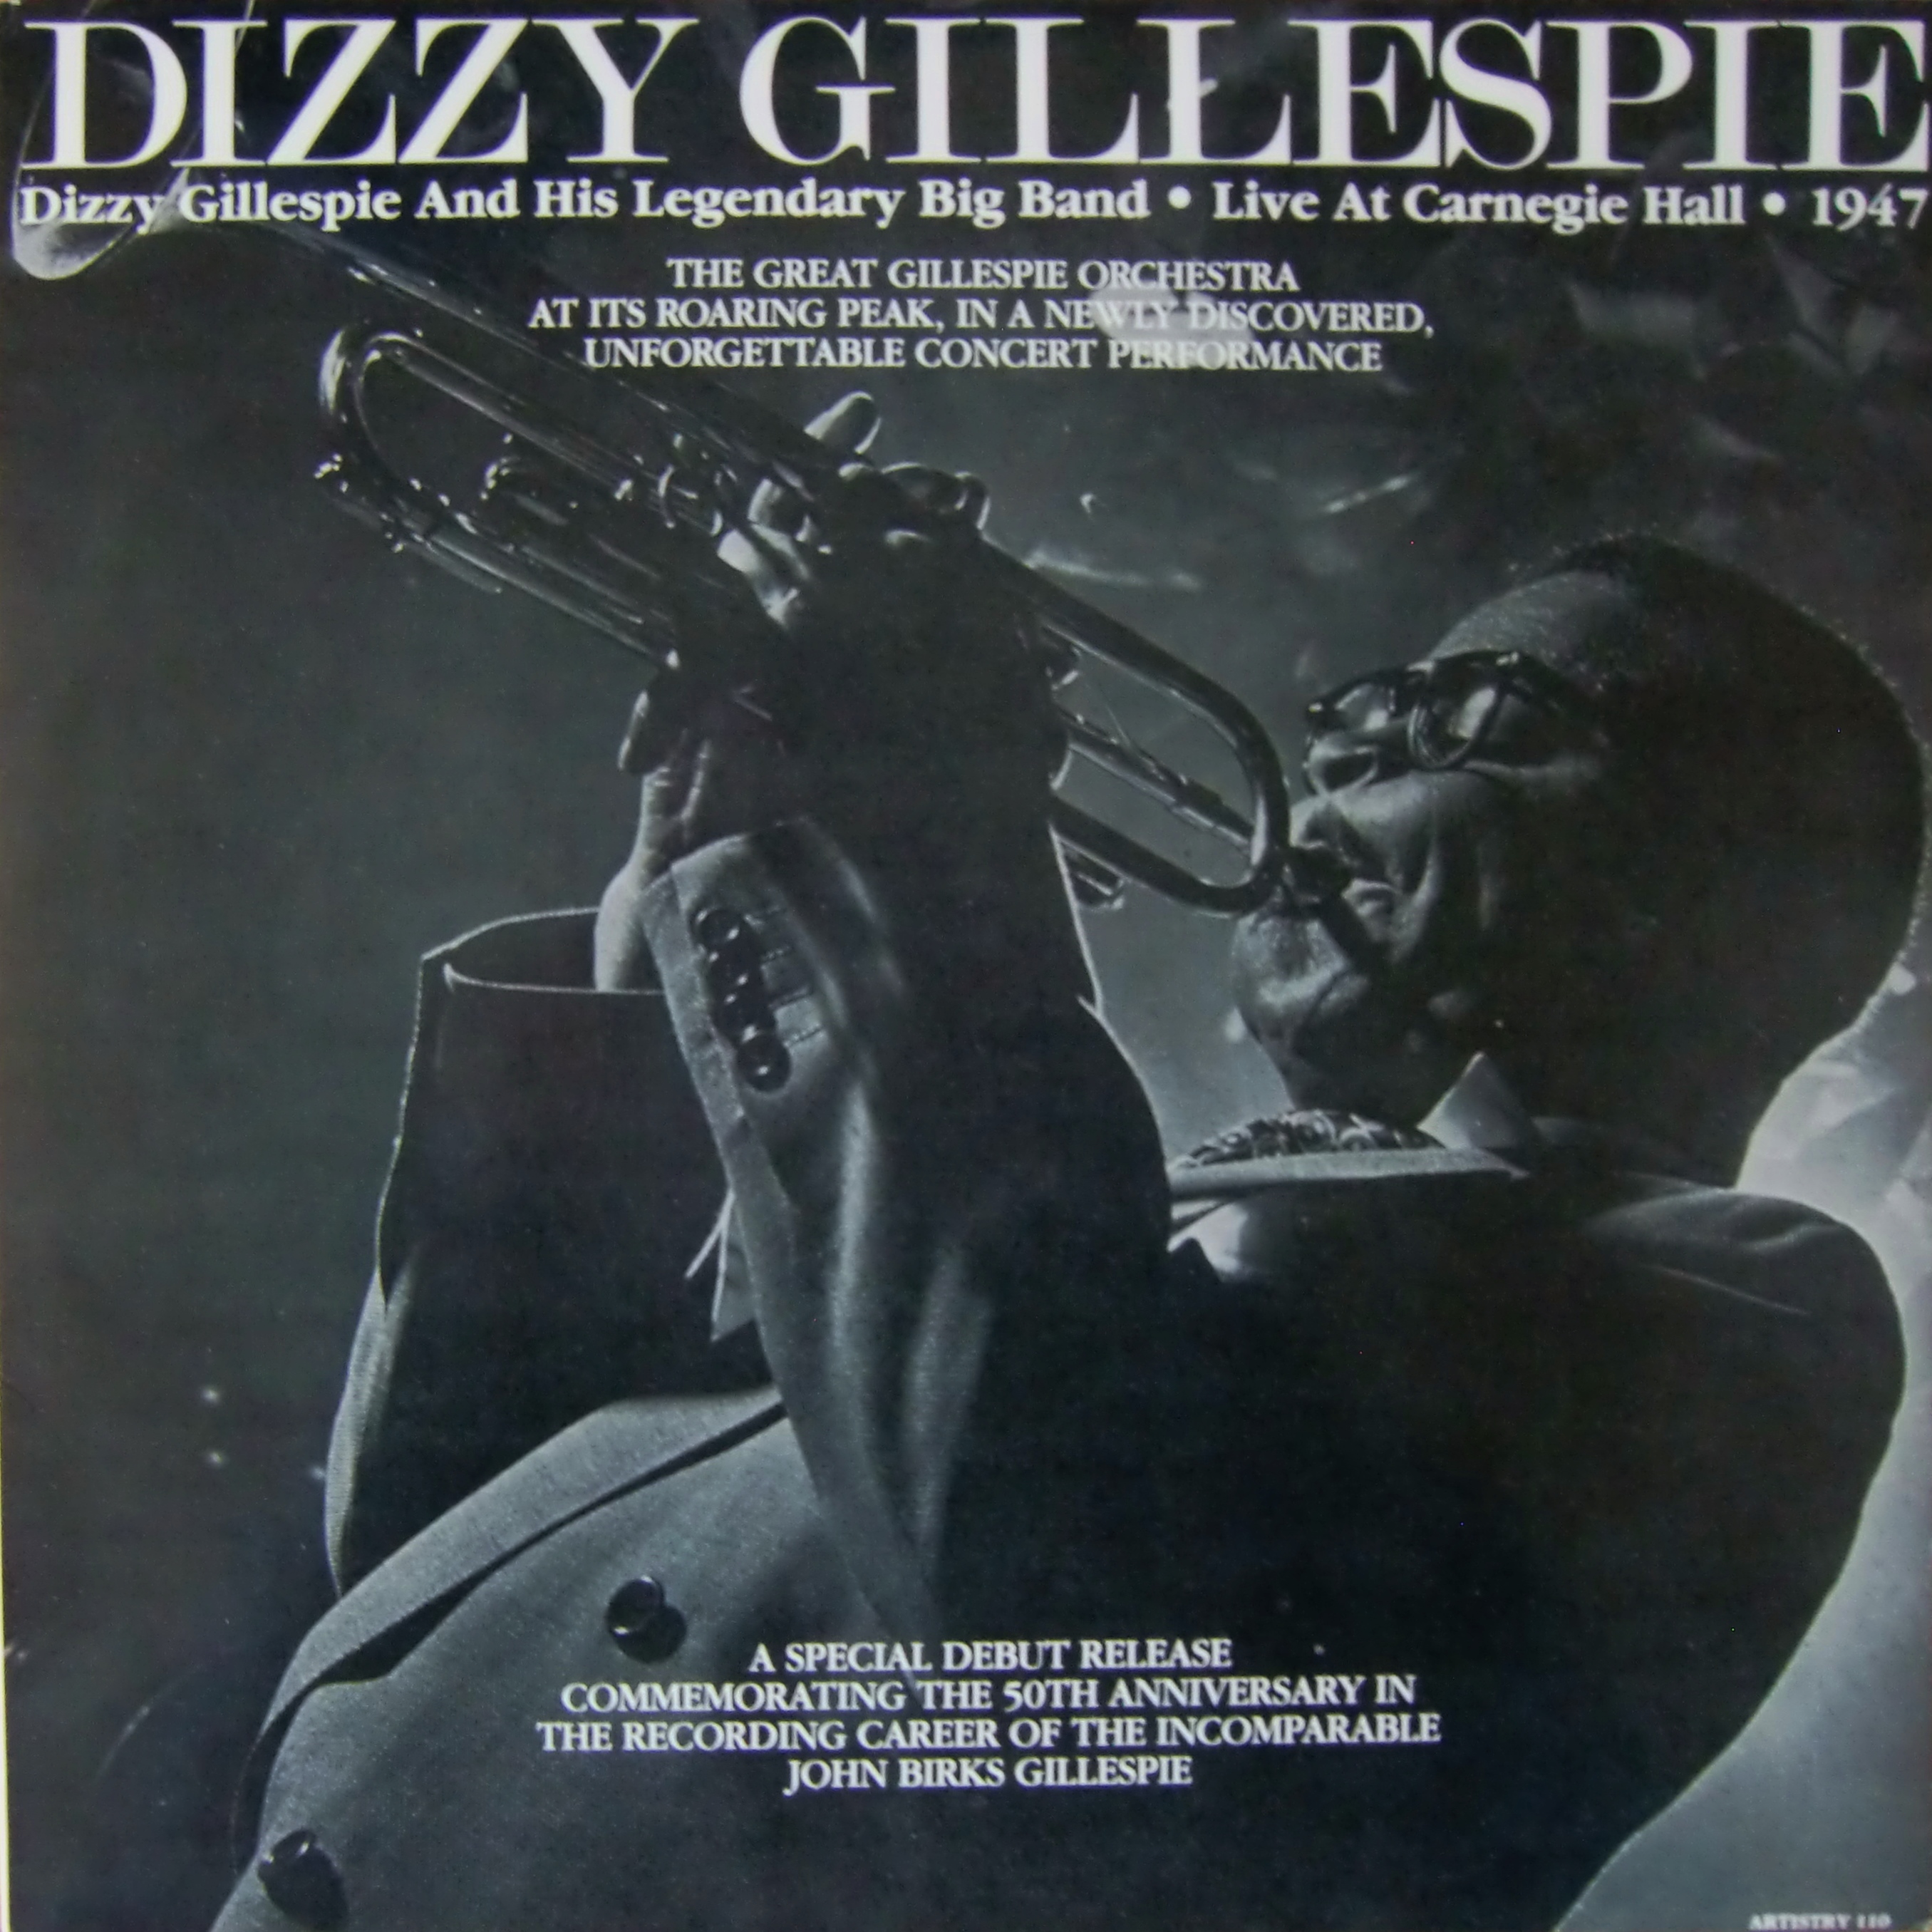 Dizzy Gillespie And His Legendary Band